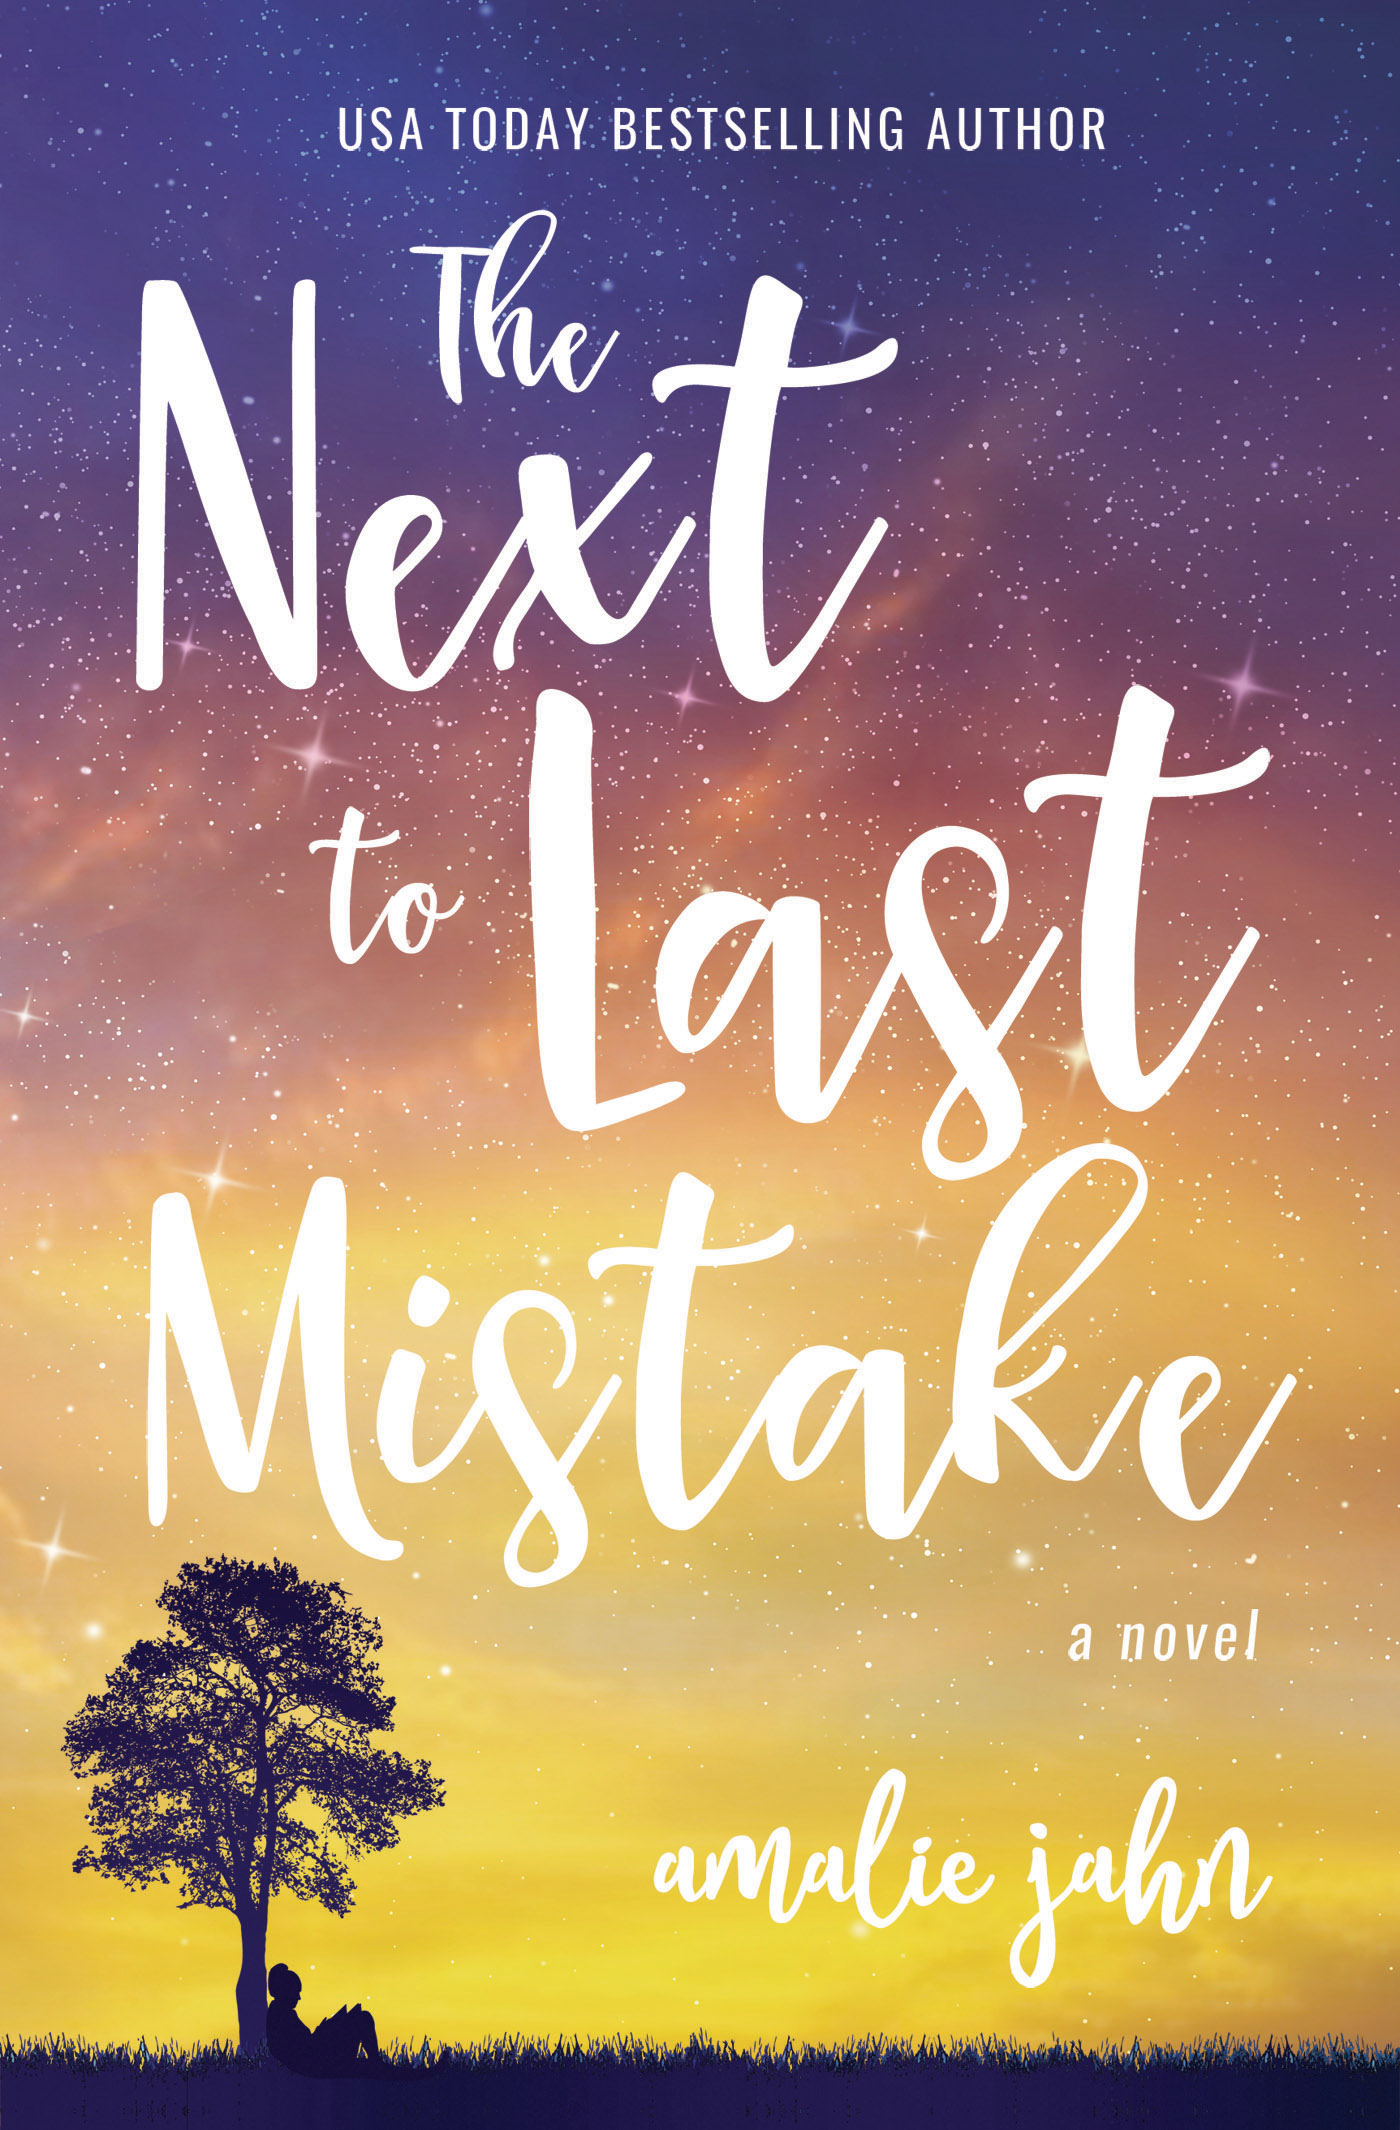 This image is the cover for the book Next to Last Mistake